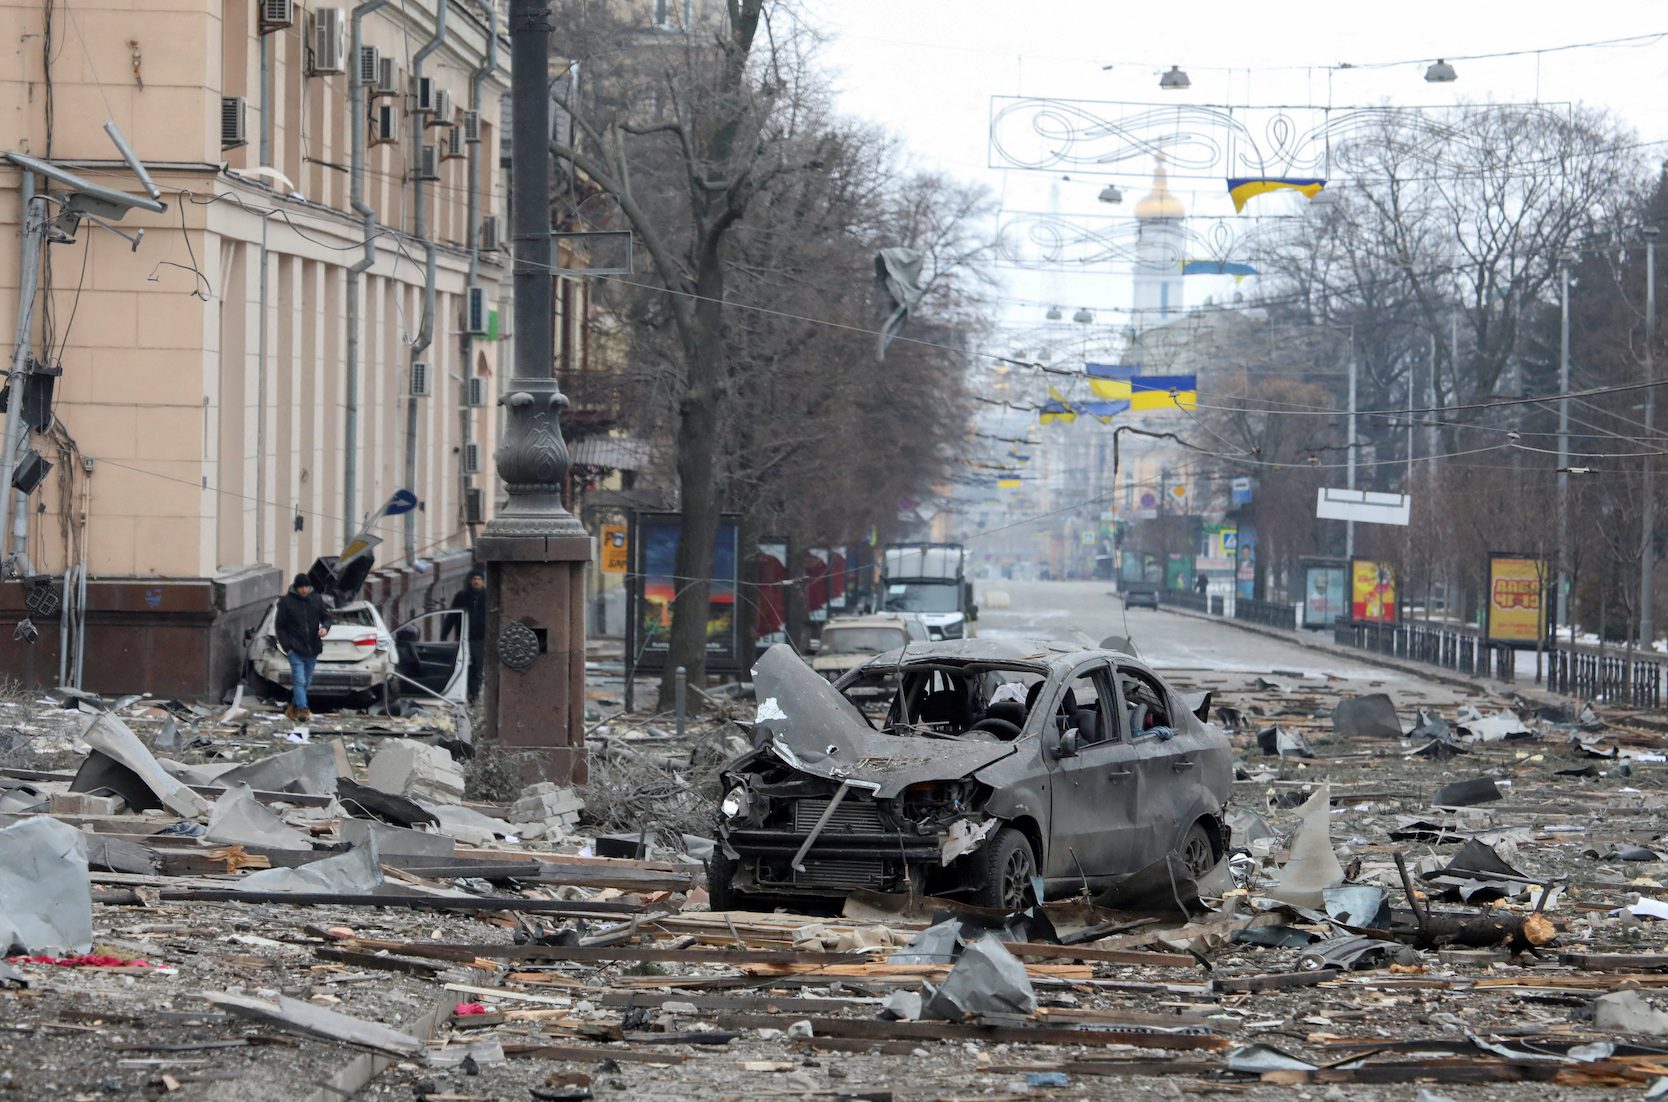 Kyiv calls for ‘ban’ on Russians as Moscow steps up assault in eastern Ukraine